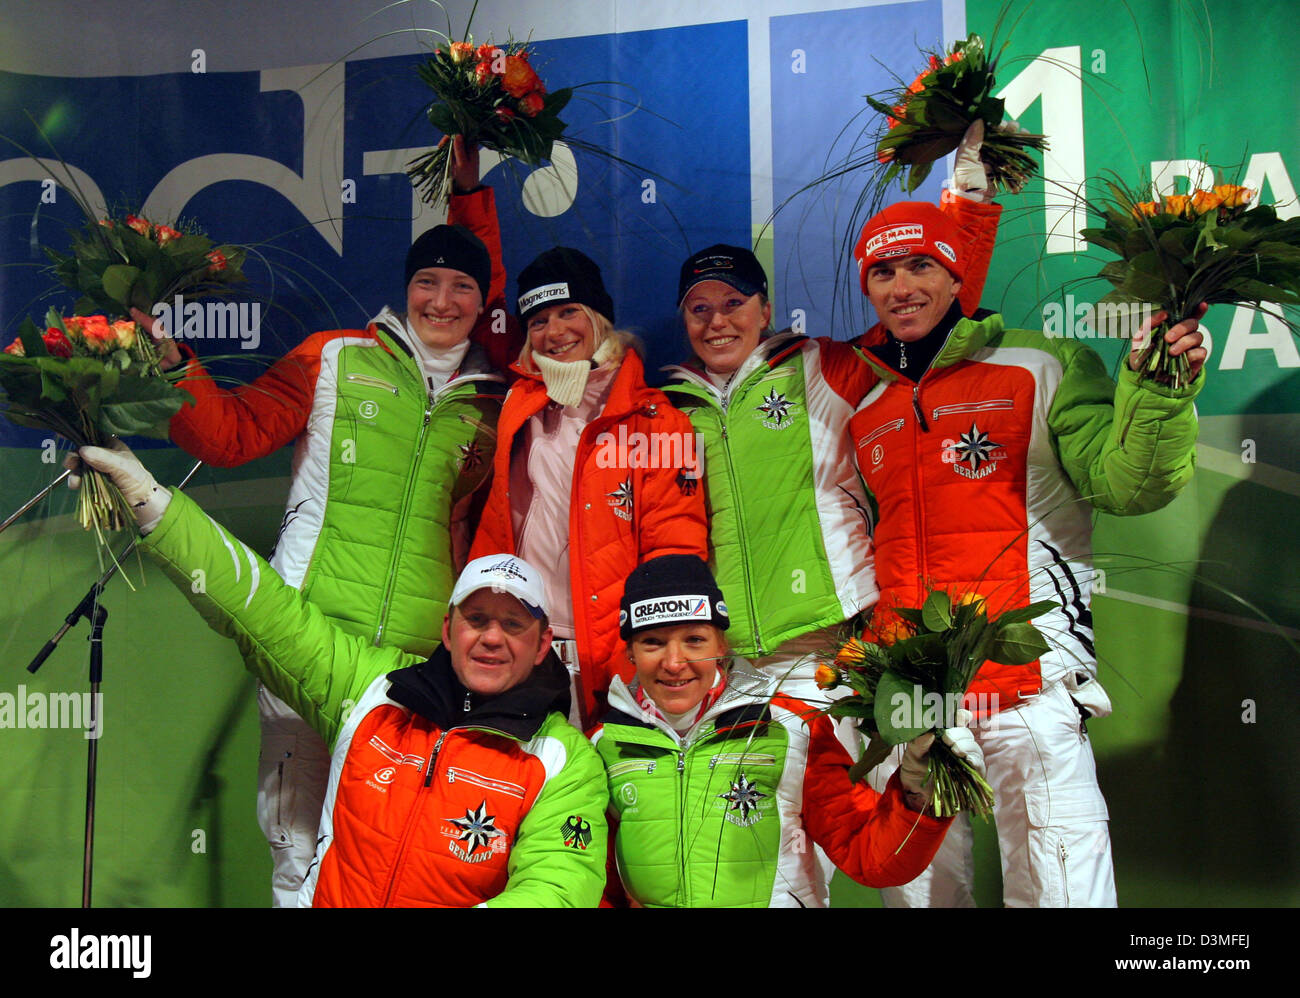 Olympic medal winners from Saxony including silver medalist in two-men luging Torsten Wustlich (front) and cross-country skier Viola Bauer as well as (back, from L) bronze medalist in luging Tatjana Huefner, silver medalist in cross-country skiing Claudia Kuenzel , gold medalist in luging Sylke Otto and silver medalist in the men's cross-country skiing event Rene Sommerfeldt cheer  Stock Photo